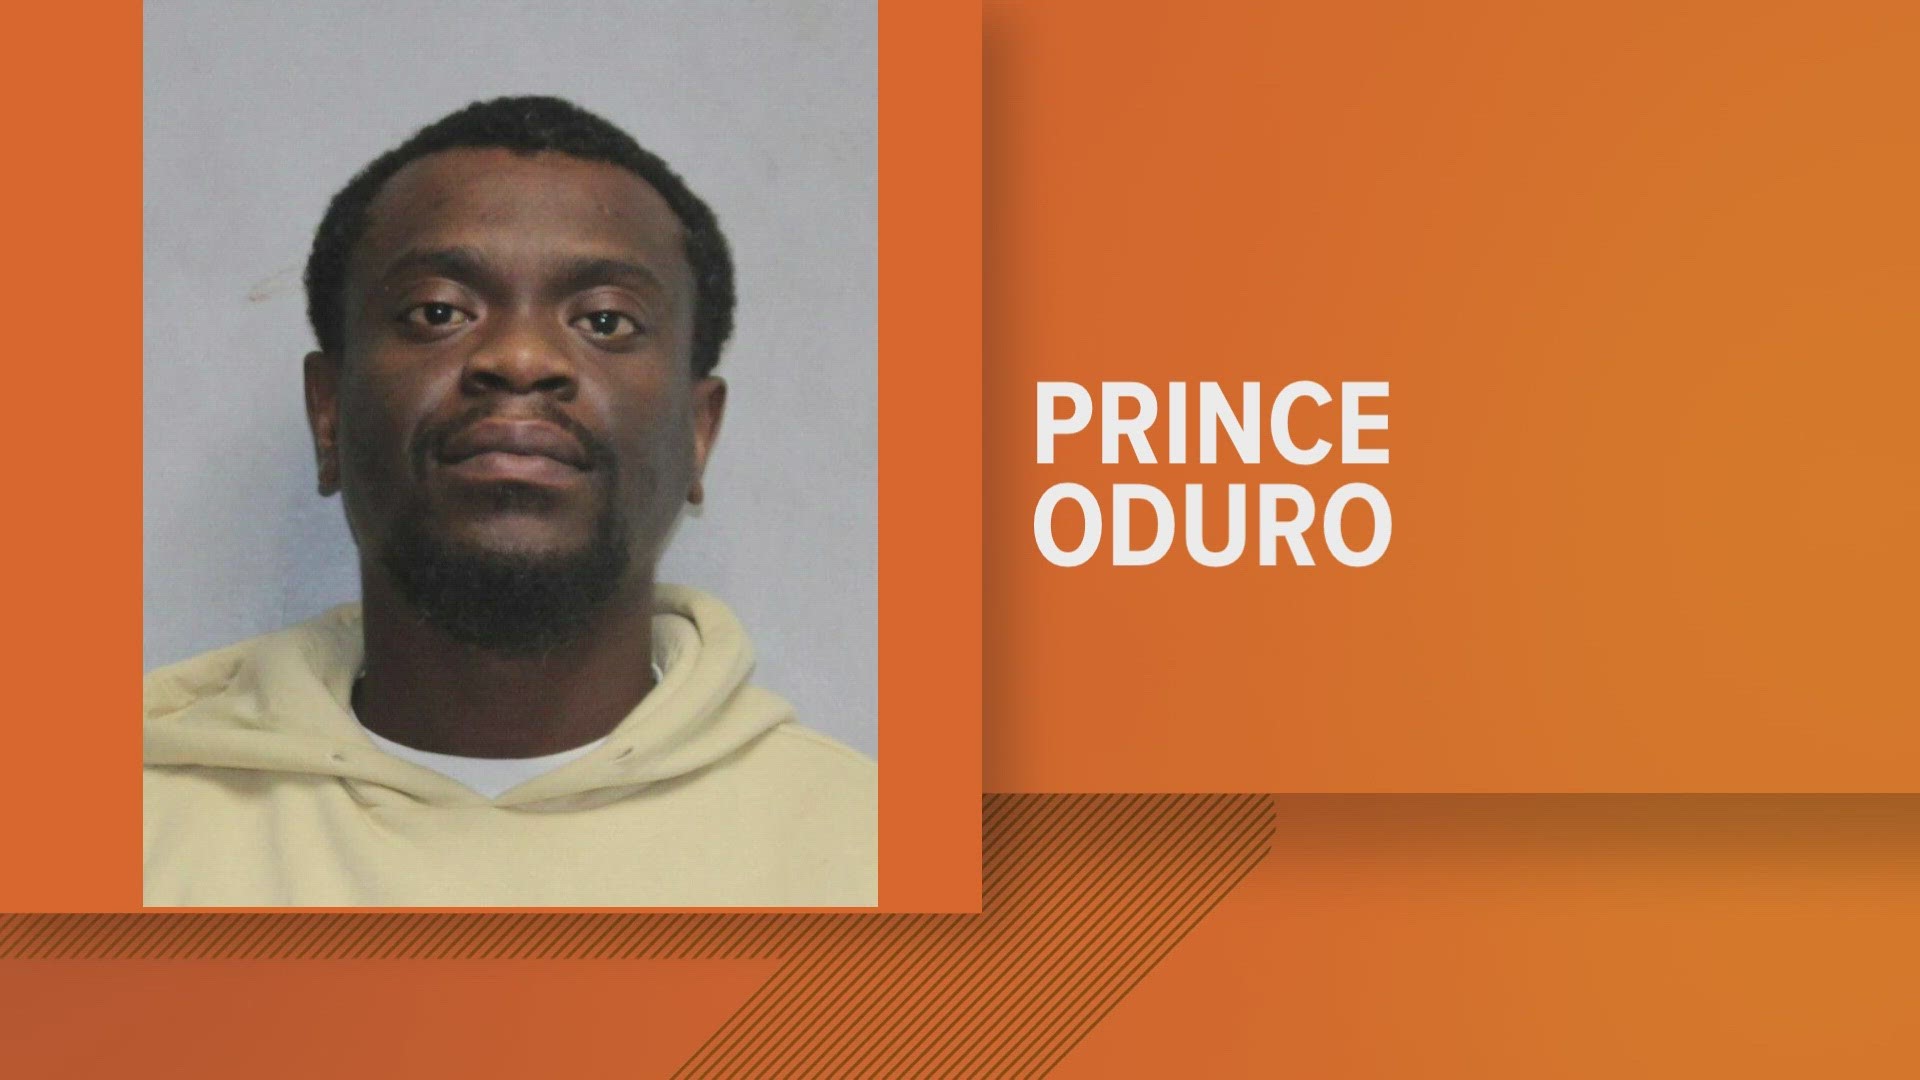 In addition to the 102 months in prison, Prince Oduro is ordered to pay $1.8 million in restitution.